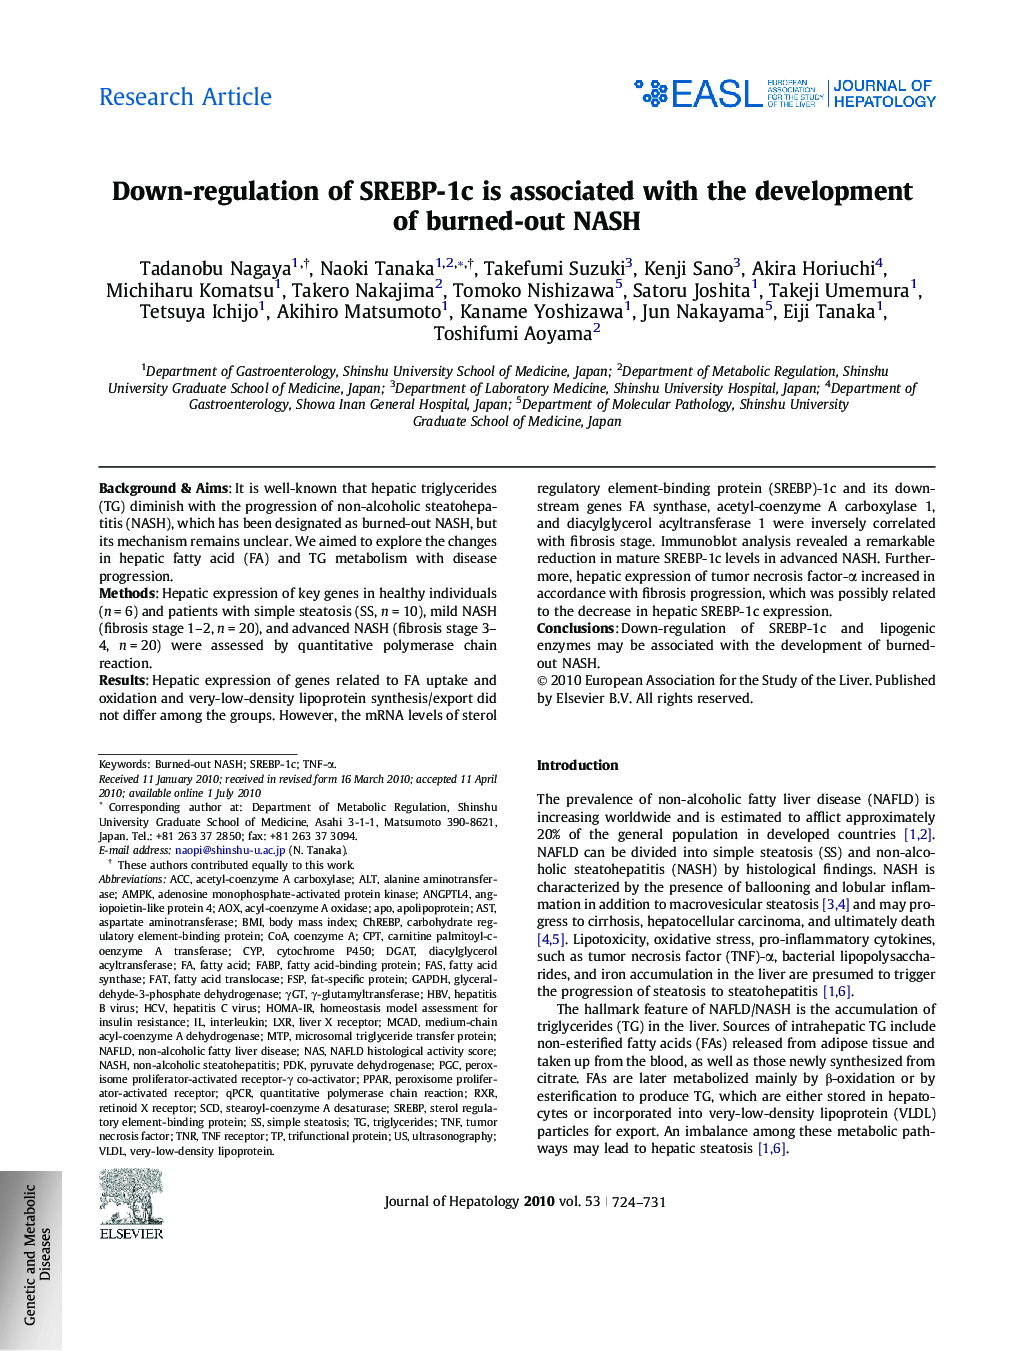 Research ArticleDown-regulation of SREBP-1c is associated with the development of burned-out NASH